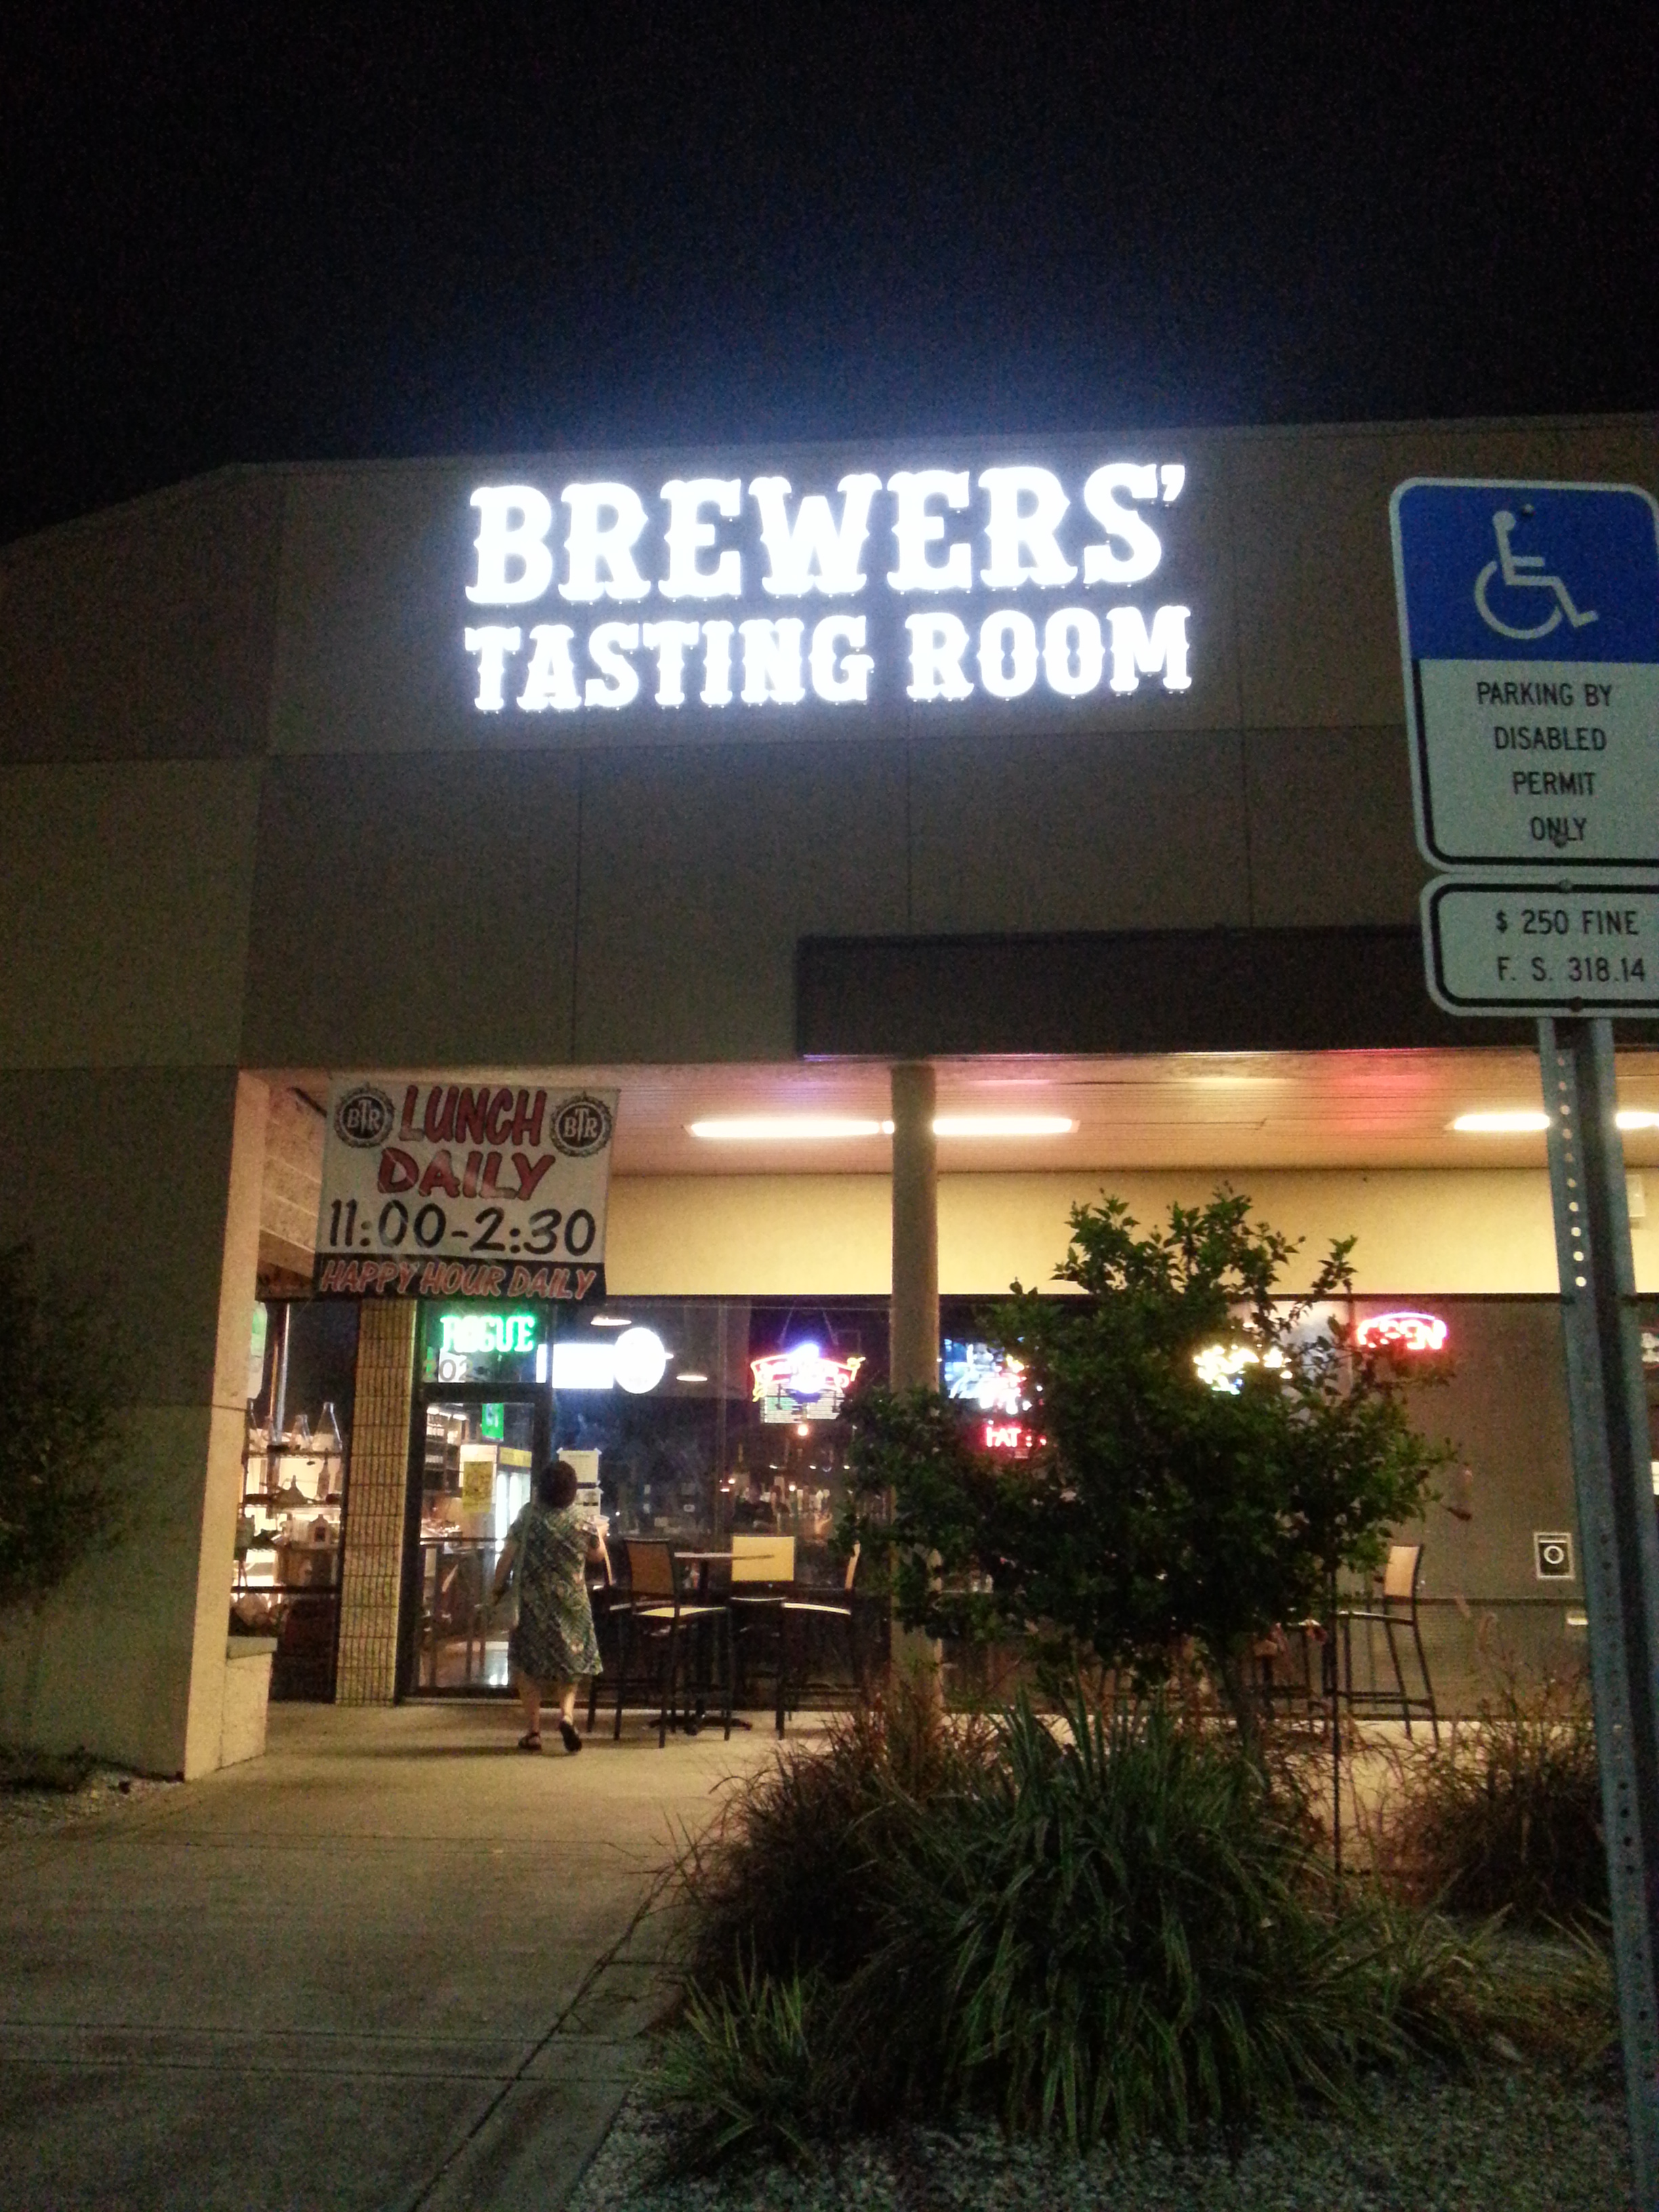 Brewers Tasting Room St Petersburg Fl Search For The